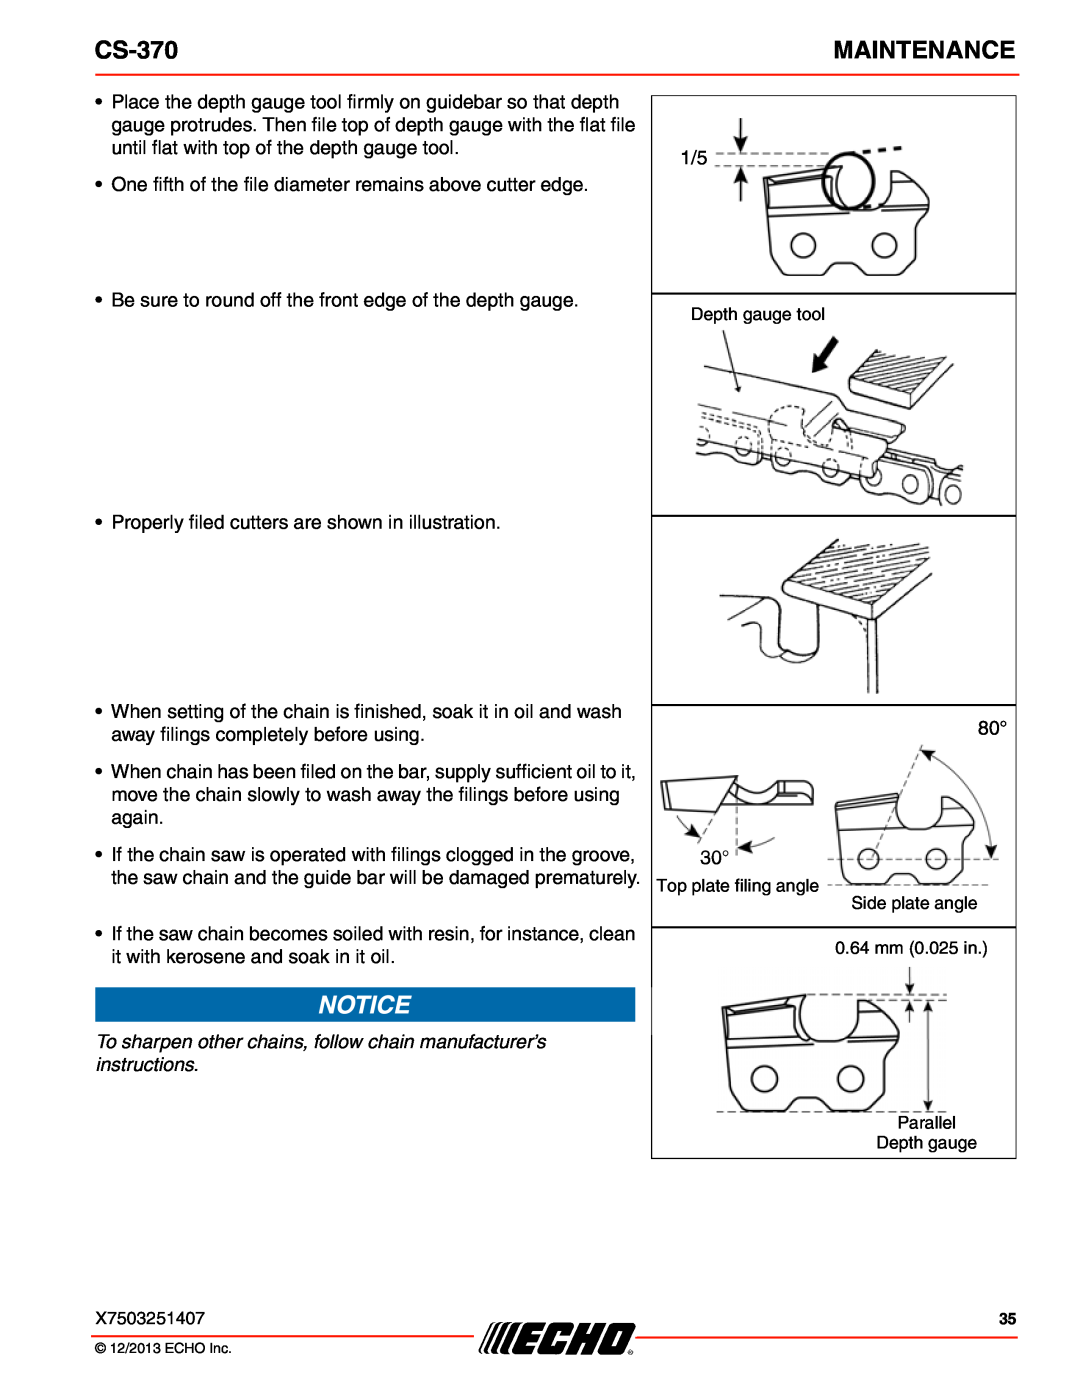 Echo CS-370 instruction manual Maintenance, Properly filed cutters are shown in illustration 